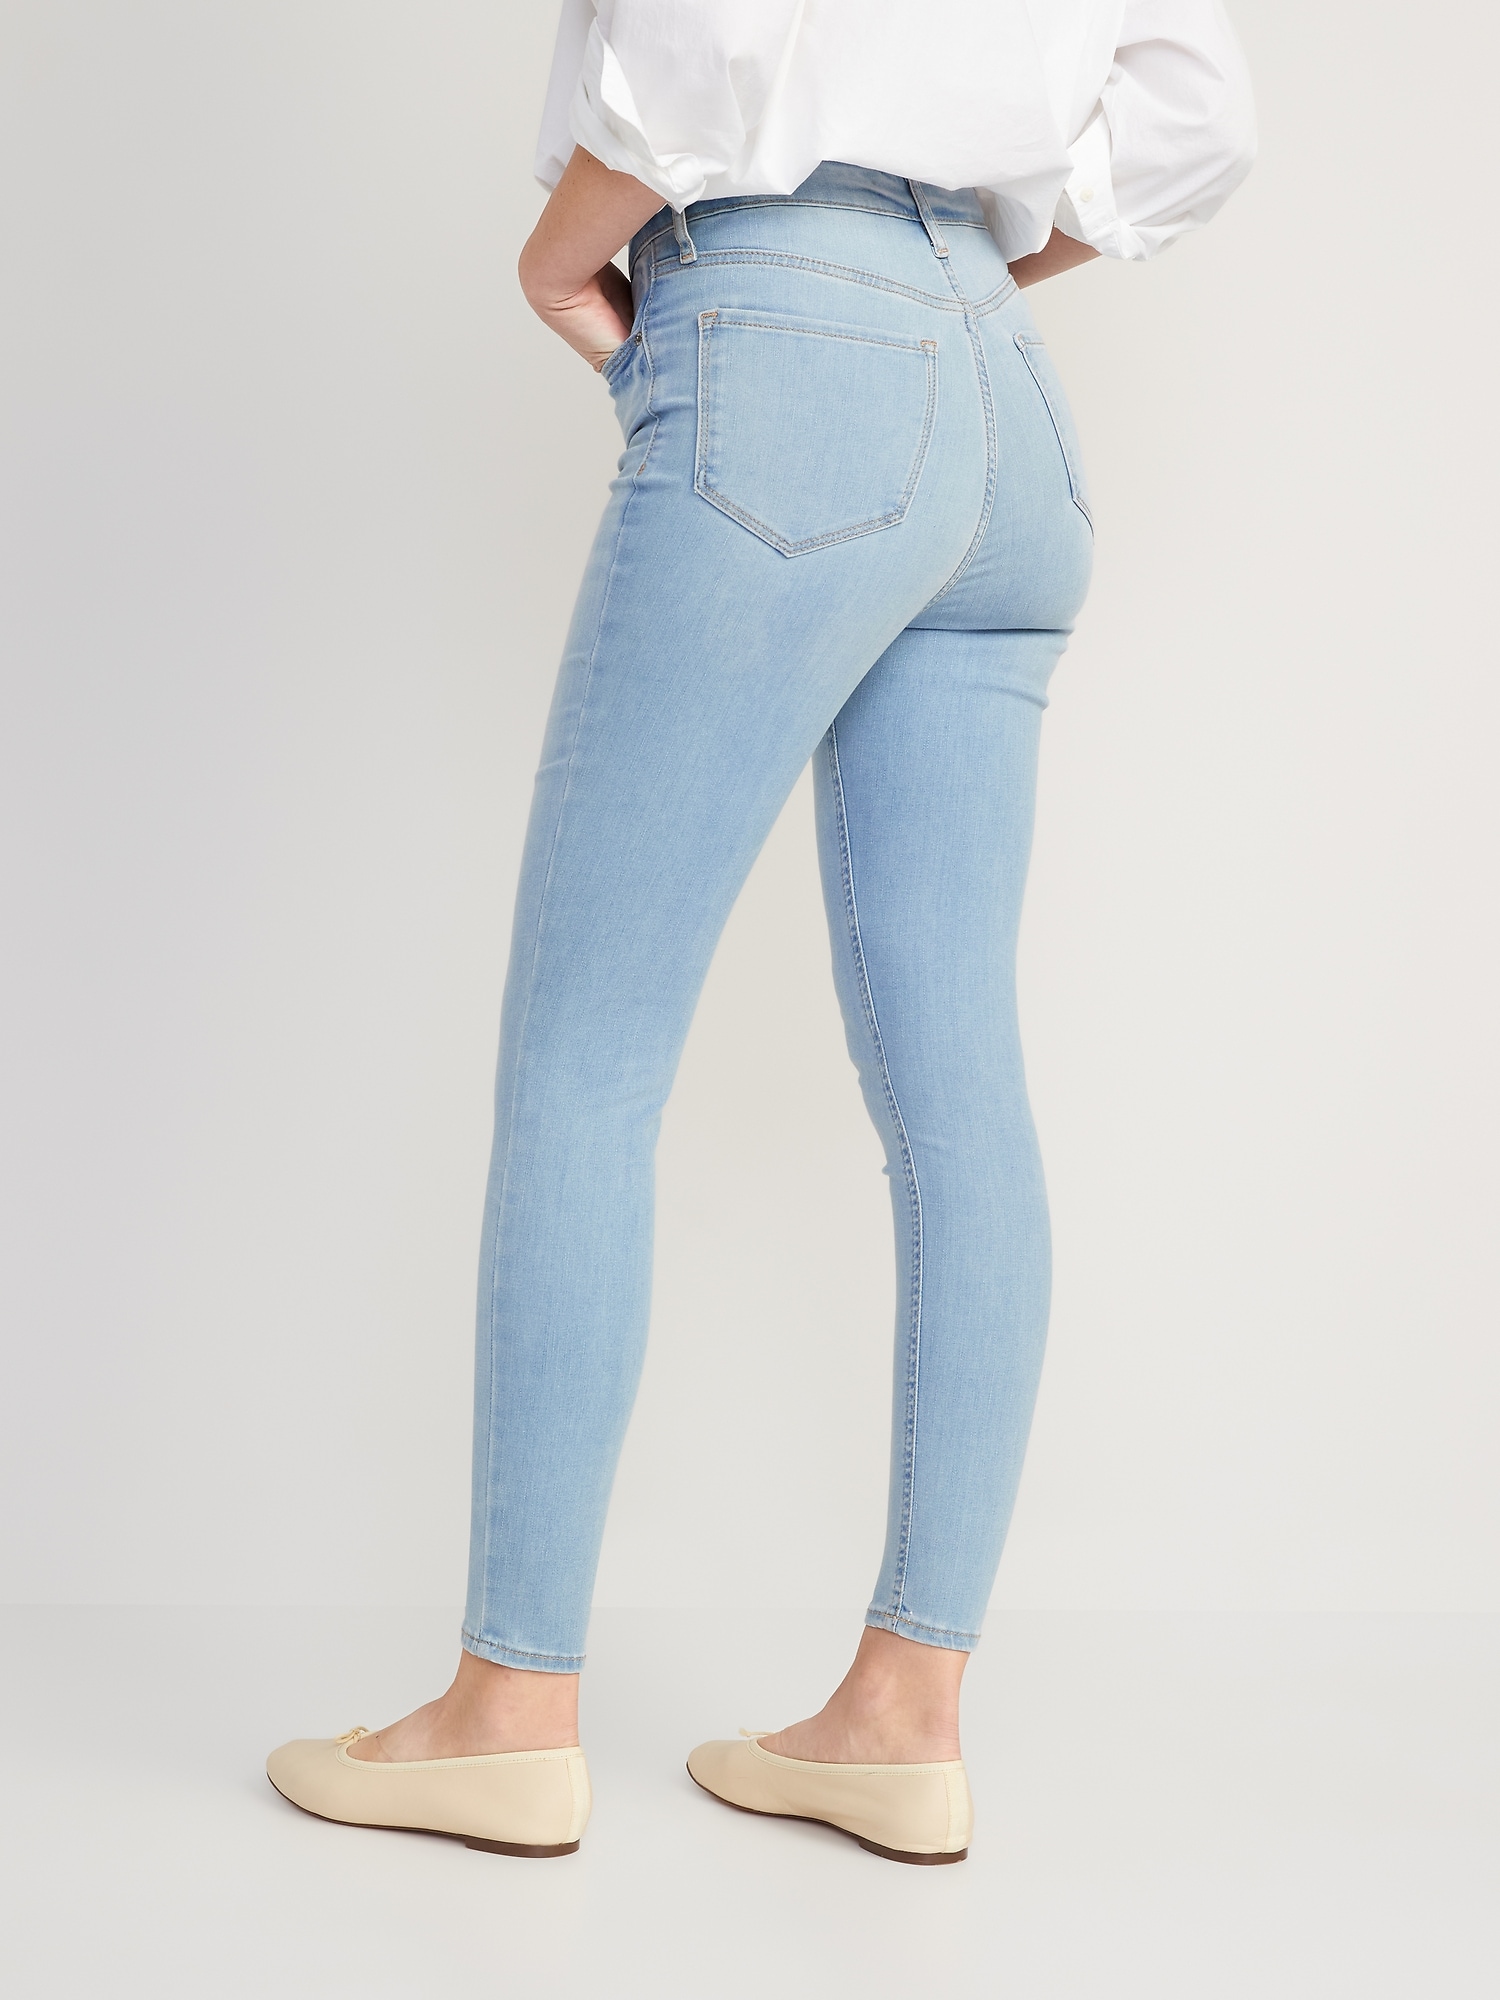 FitsYou 3-Sizes-in-1 Extra High-Waisted Rockstar Super-Skinny Jeans for ...